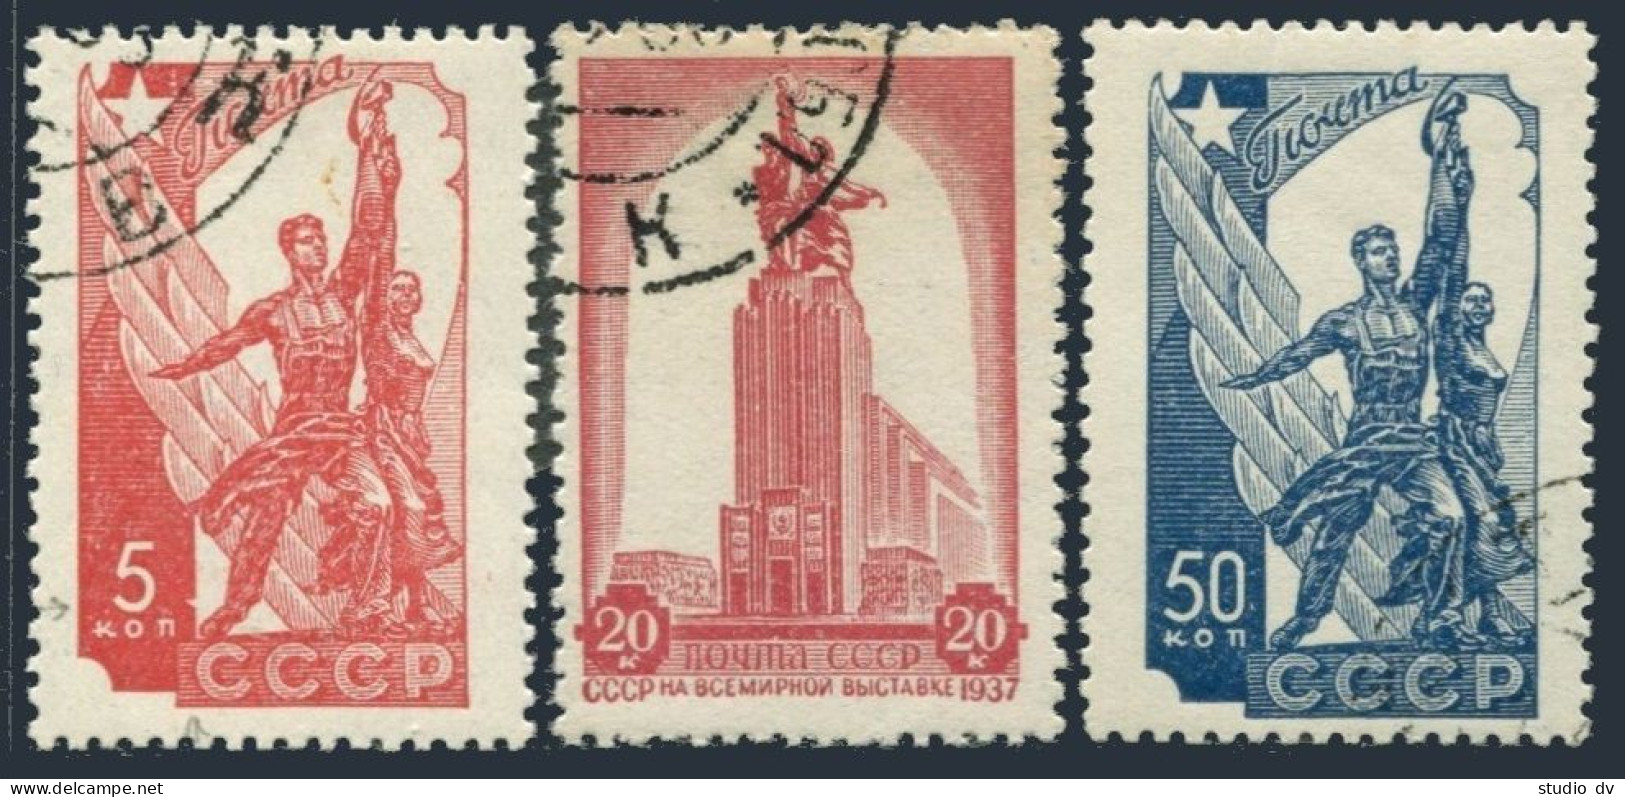 Russia 611-613,CTO.Michel 581-583. EXPO Paris-1937.Monument,by Mukhina. - Used Stamps